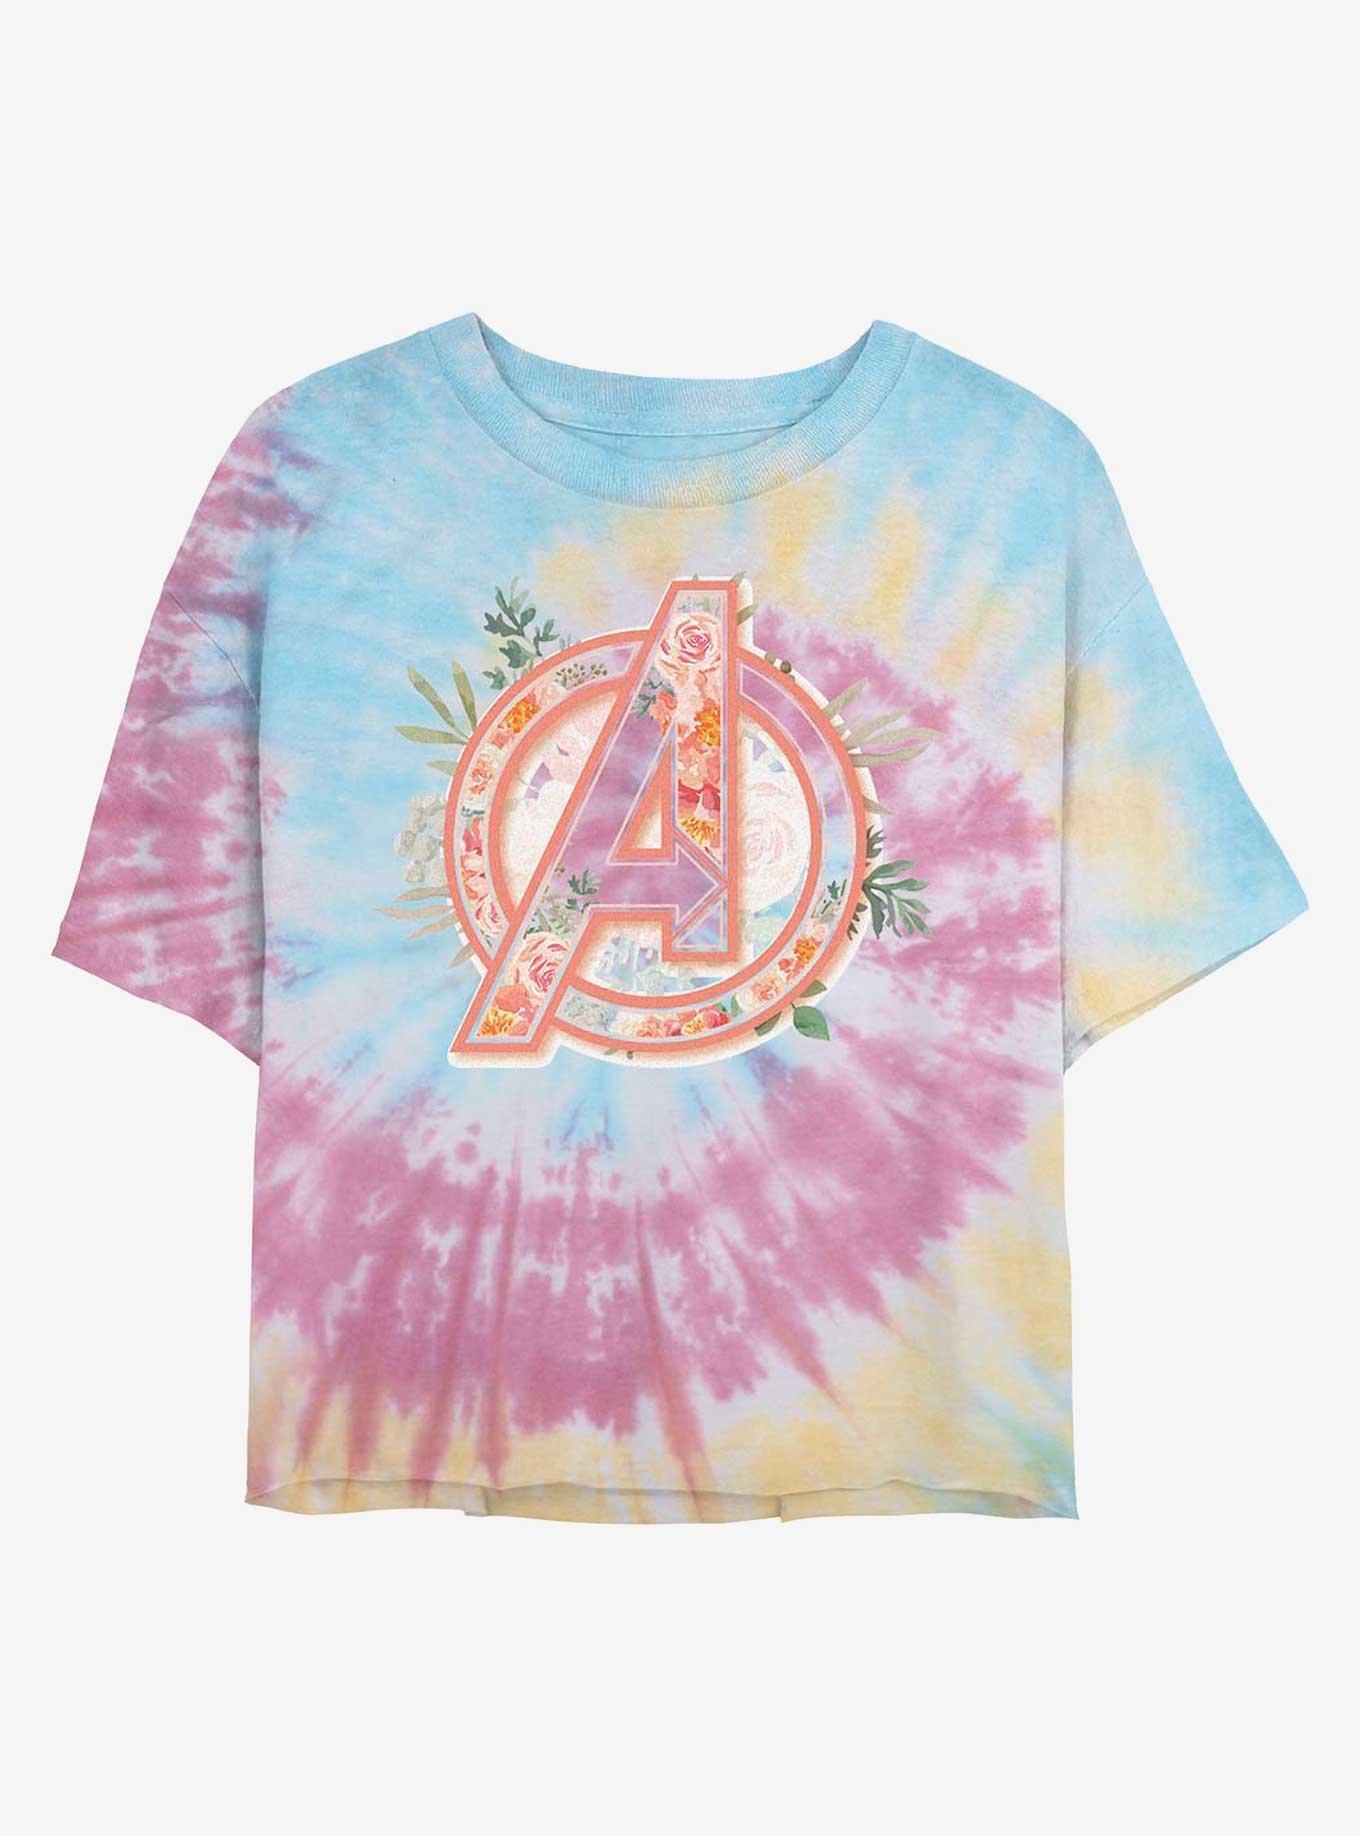 Marvel Avengers Floral Icon Tie Dye Crop Girls T-Shirt, BLUPNKLY, hi-res